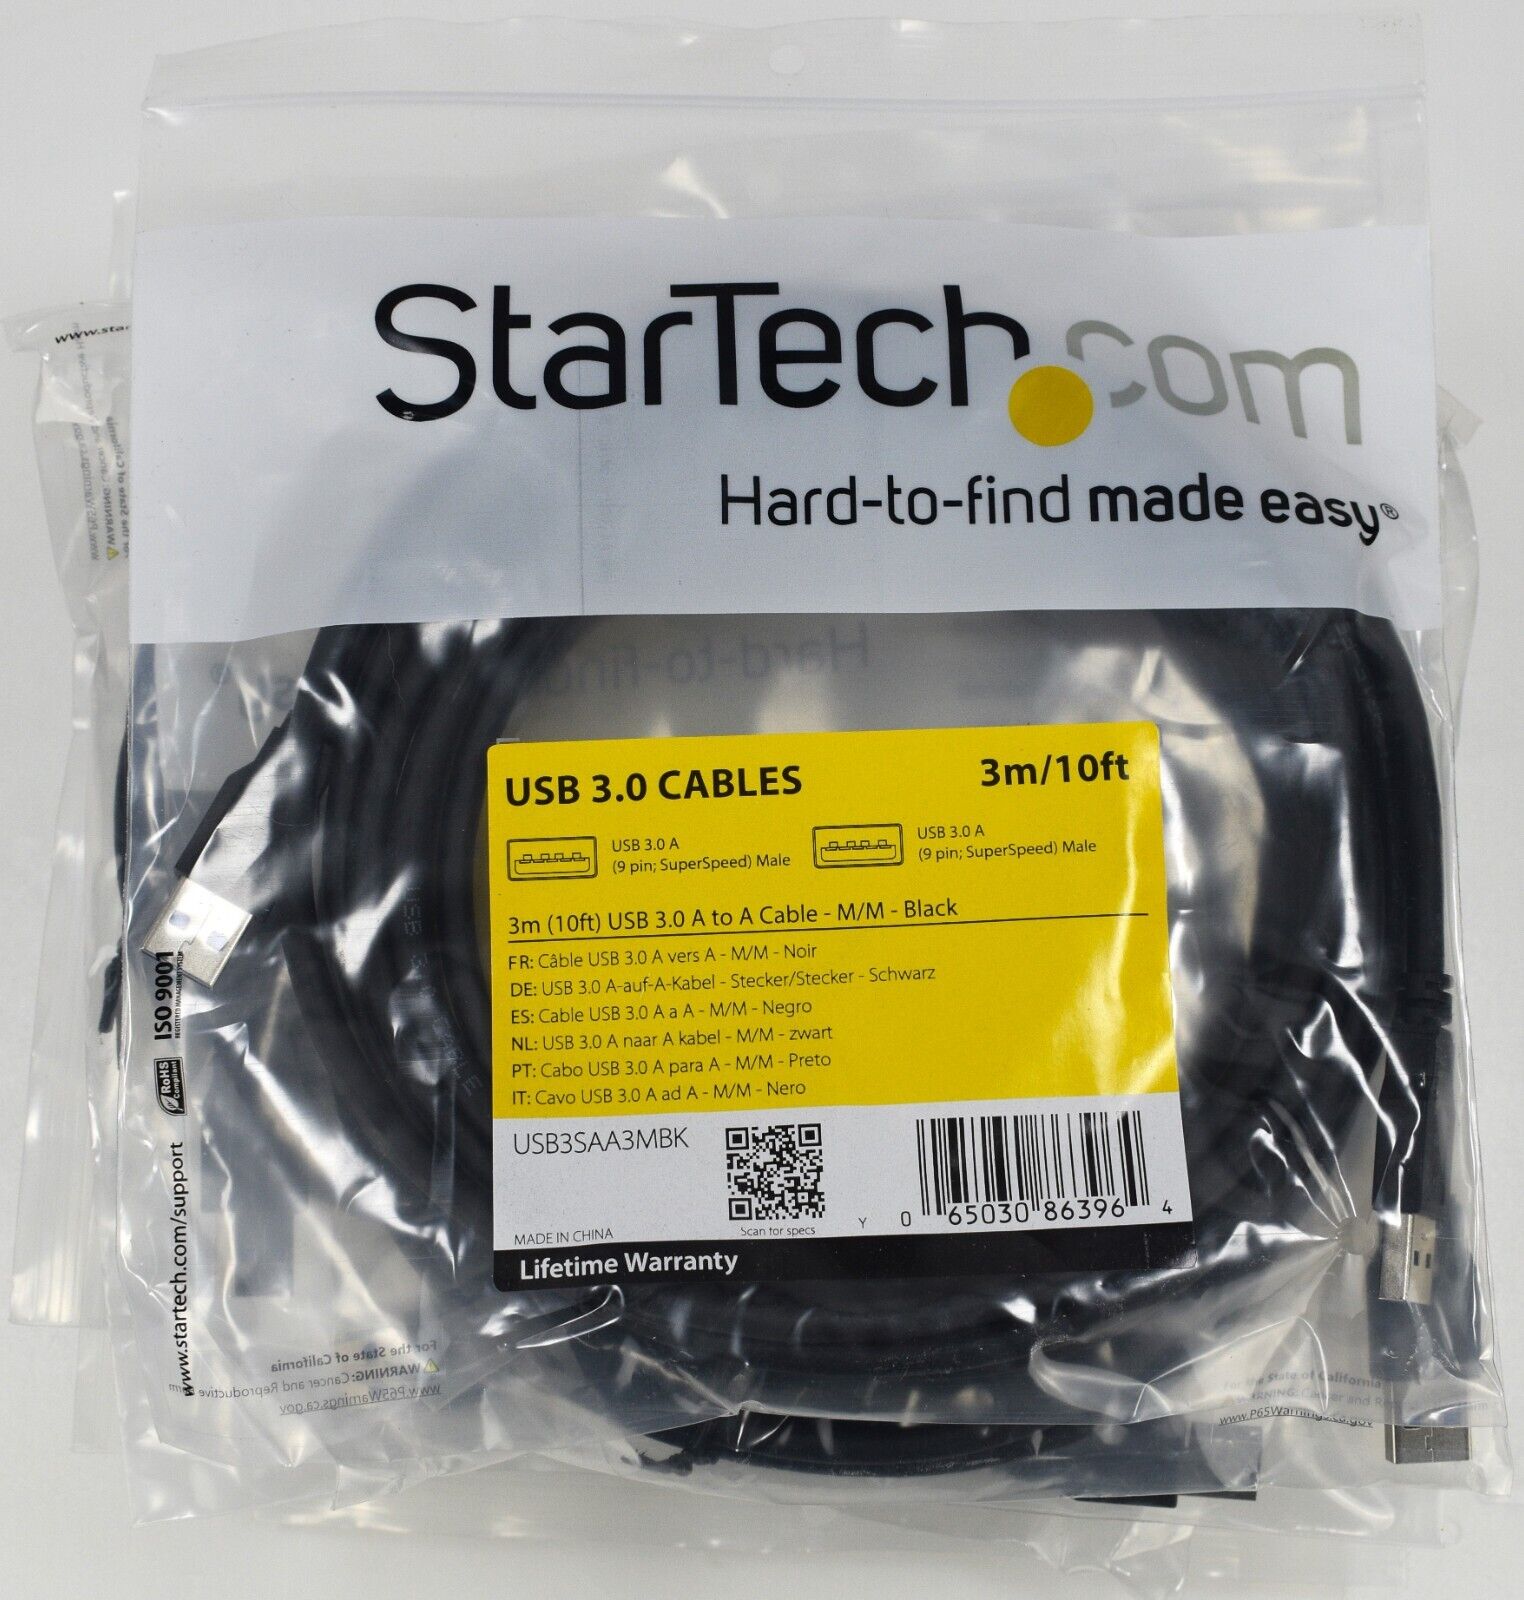 Lot of 10 StarTech 3m (10ft) USB 3.0 A to A Cables - M/M - Black